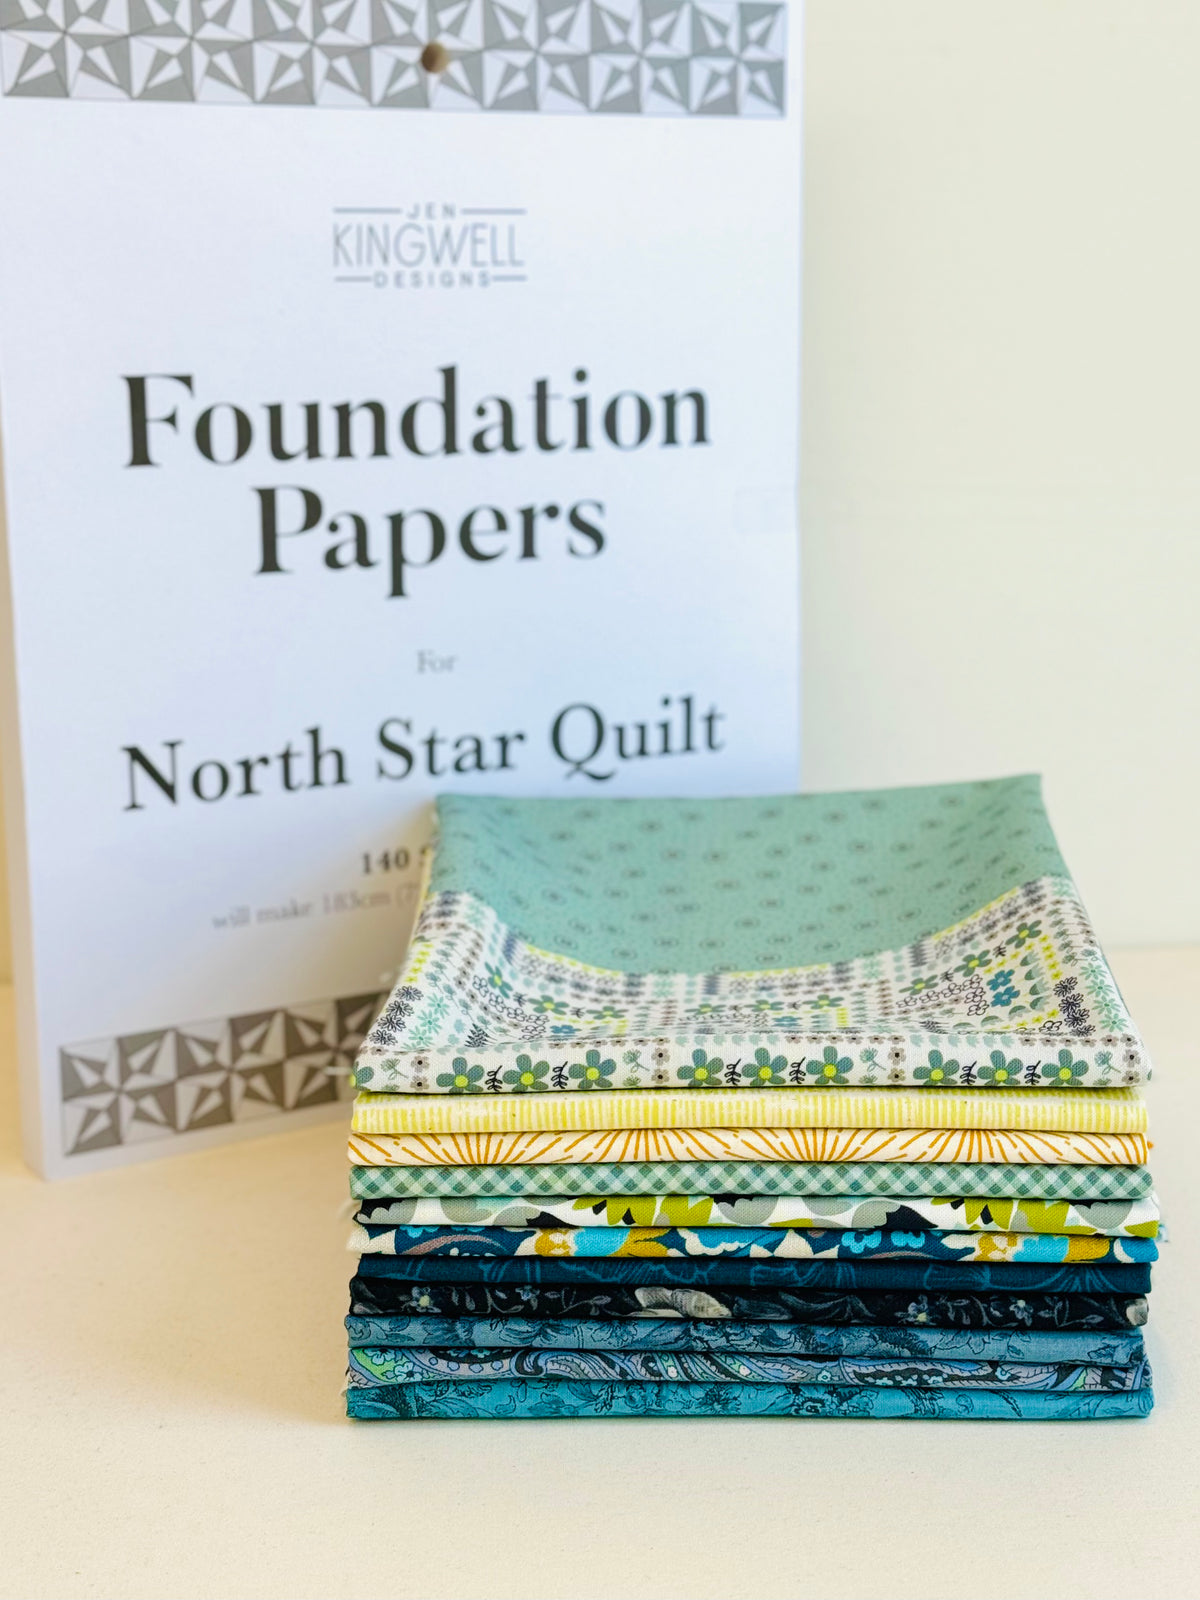 Winter Sky Bundle + North Star Foundation Papers